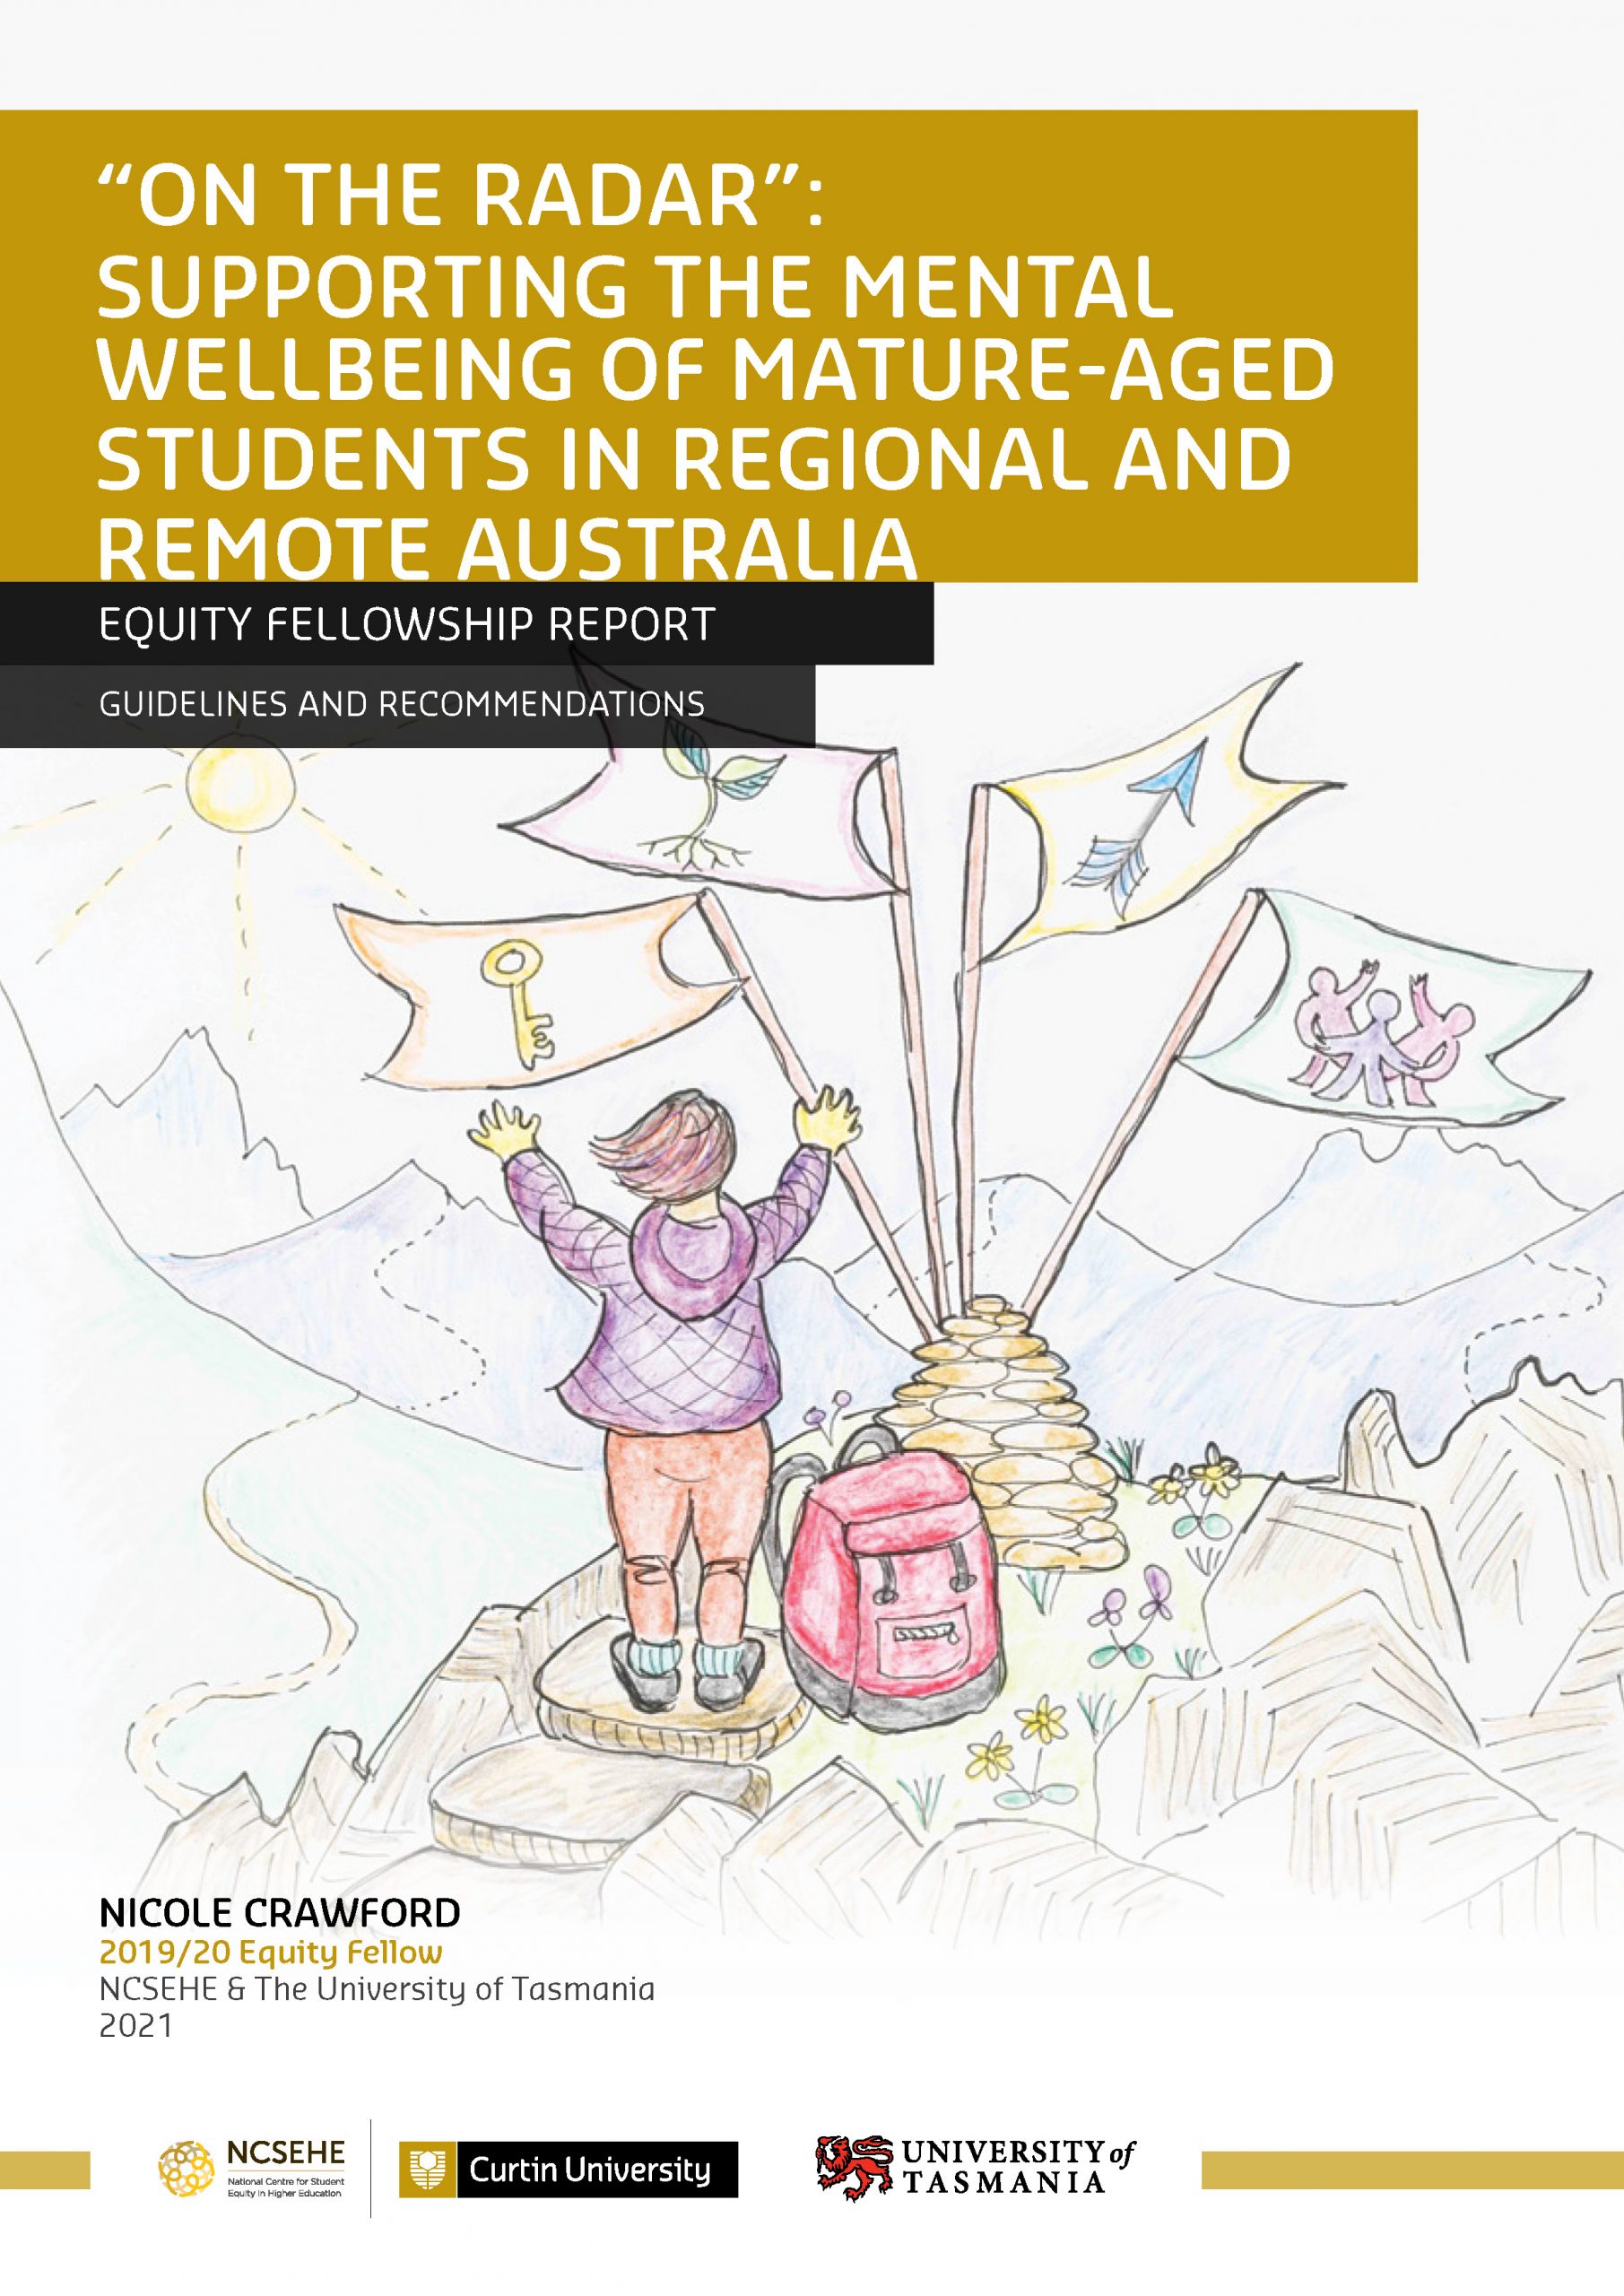 On the radar: Supporting the mental wellbeing of mature-aged students in regional and remote Australia - Equity Fellowship Report: Guidelines and Recommendations